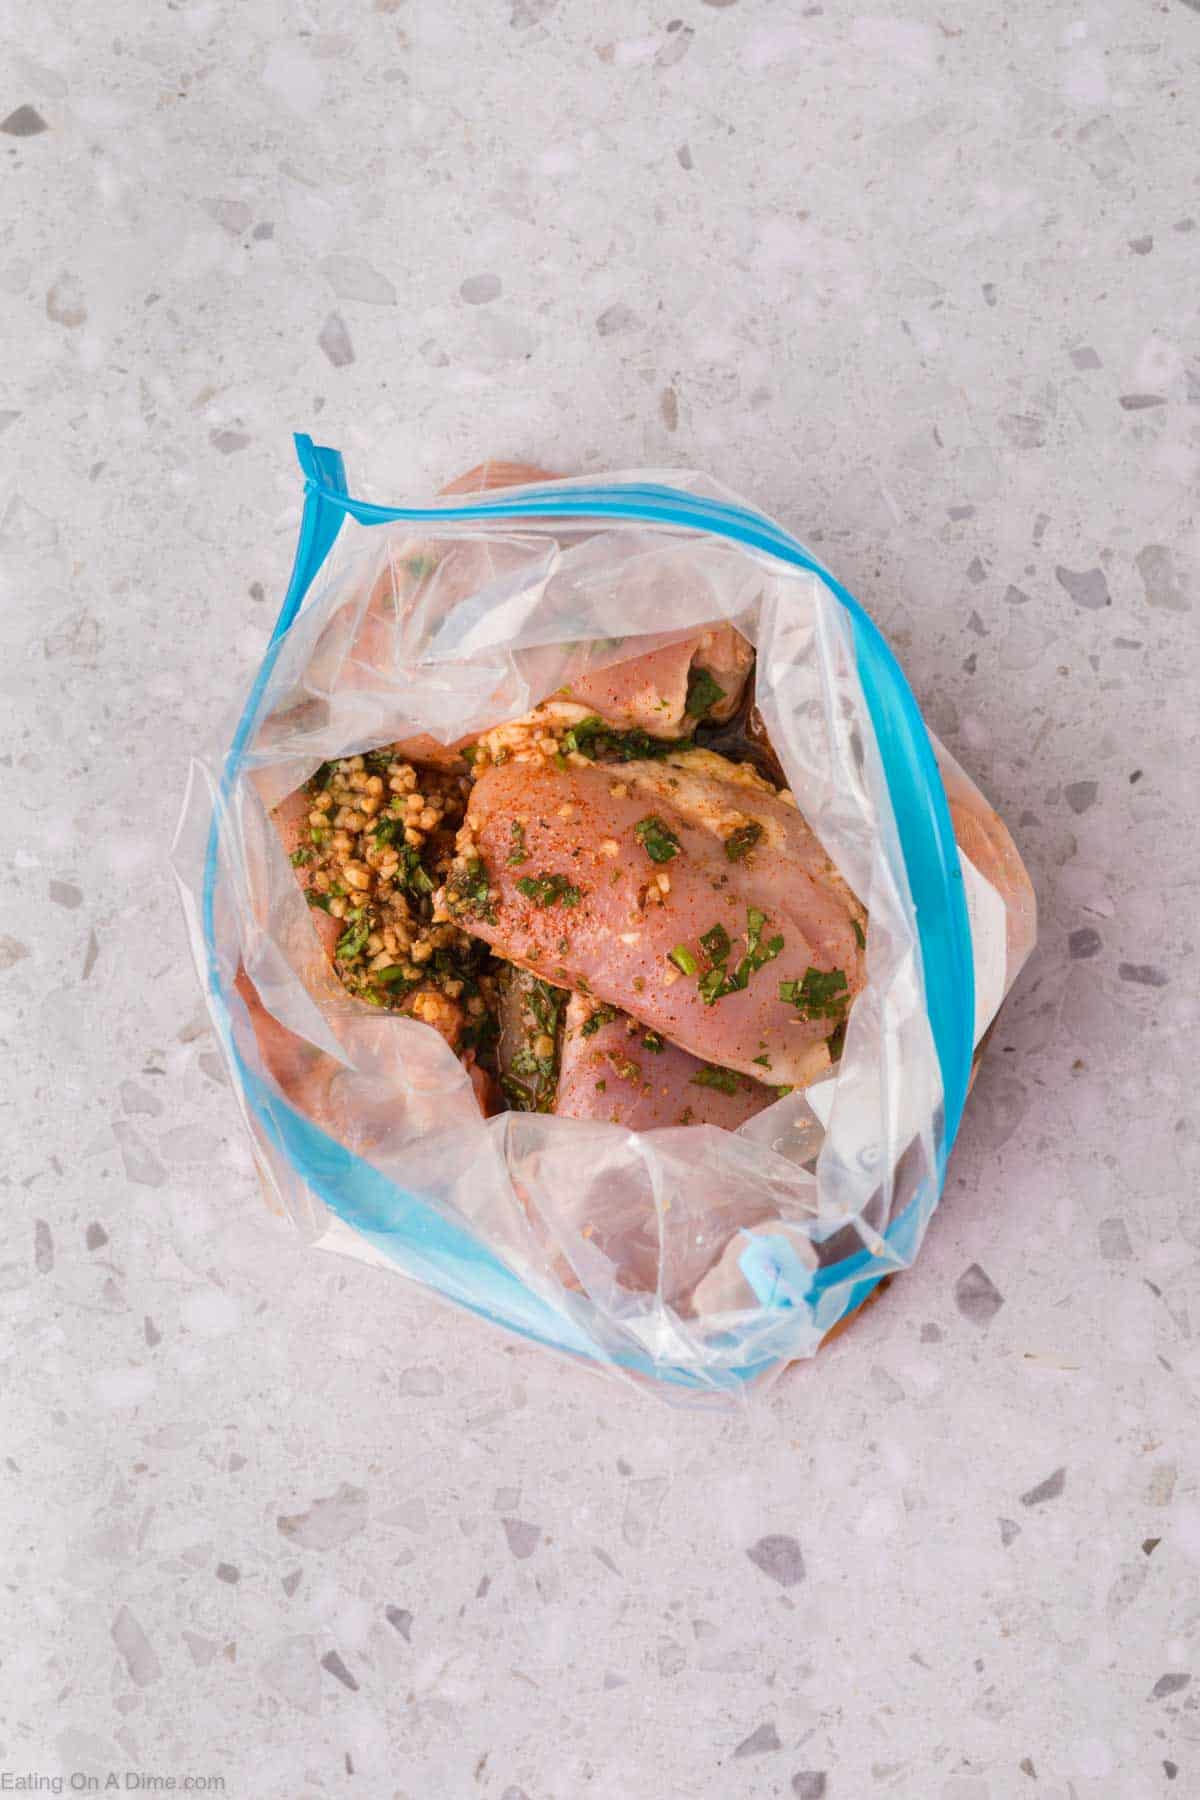 Marinade poured over the chicken thighs in a ziplock bag